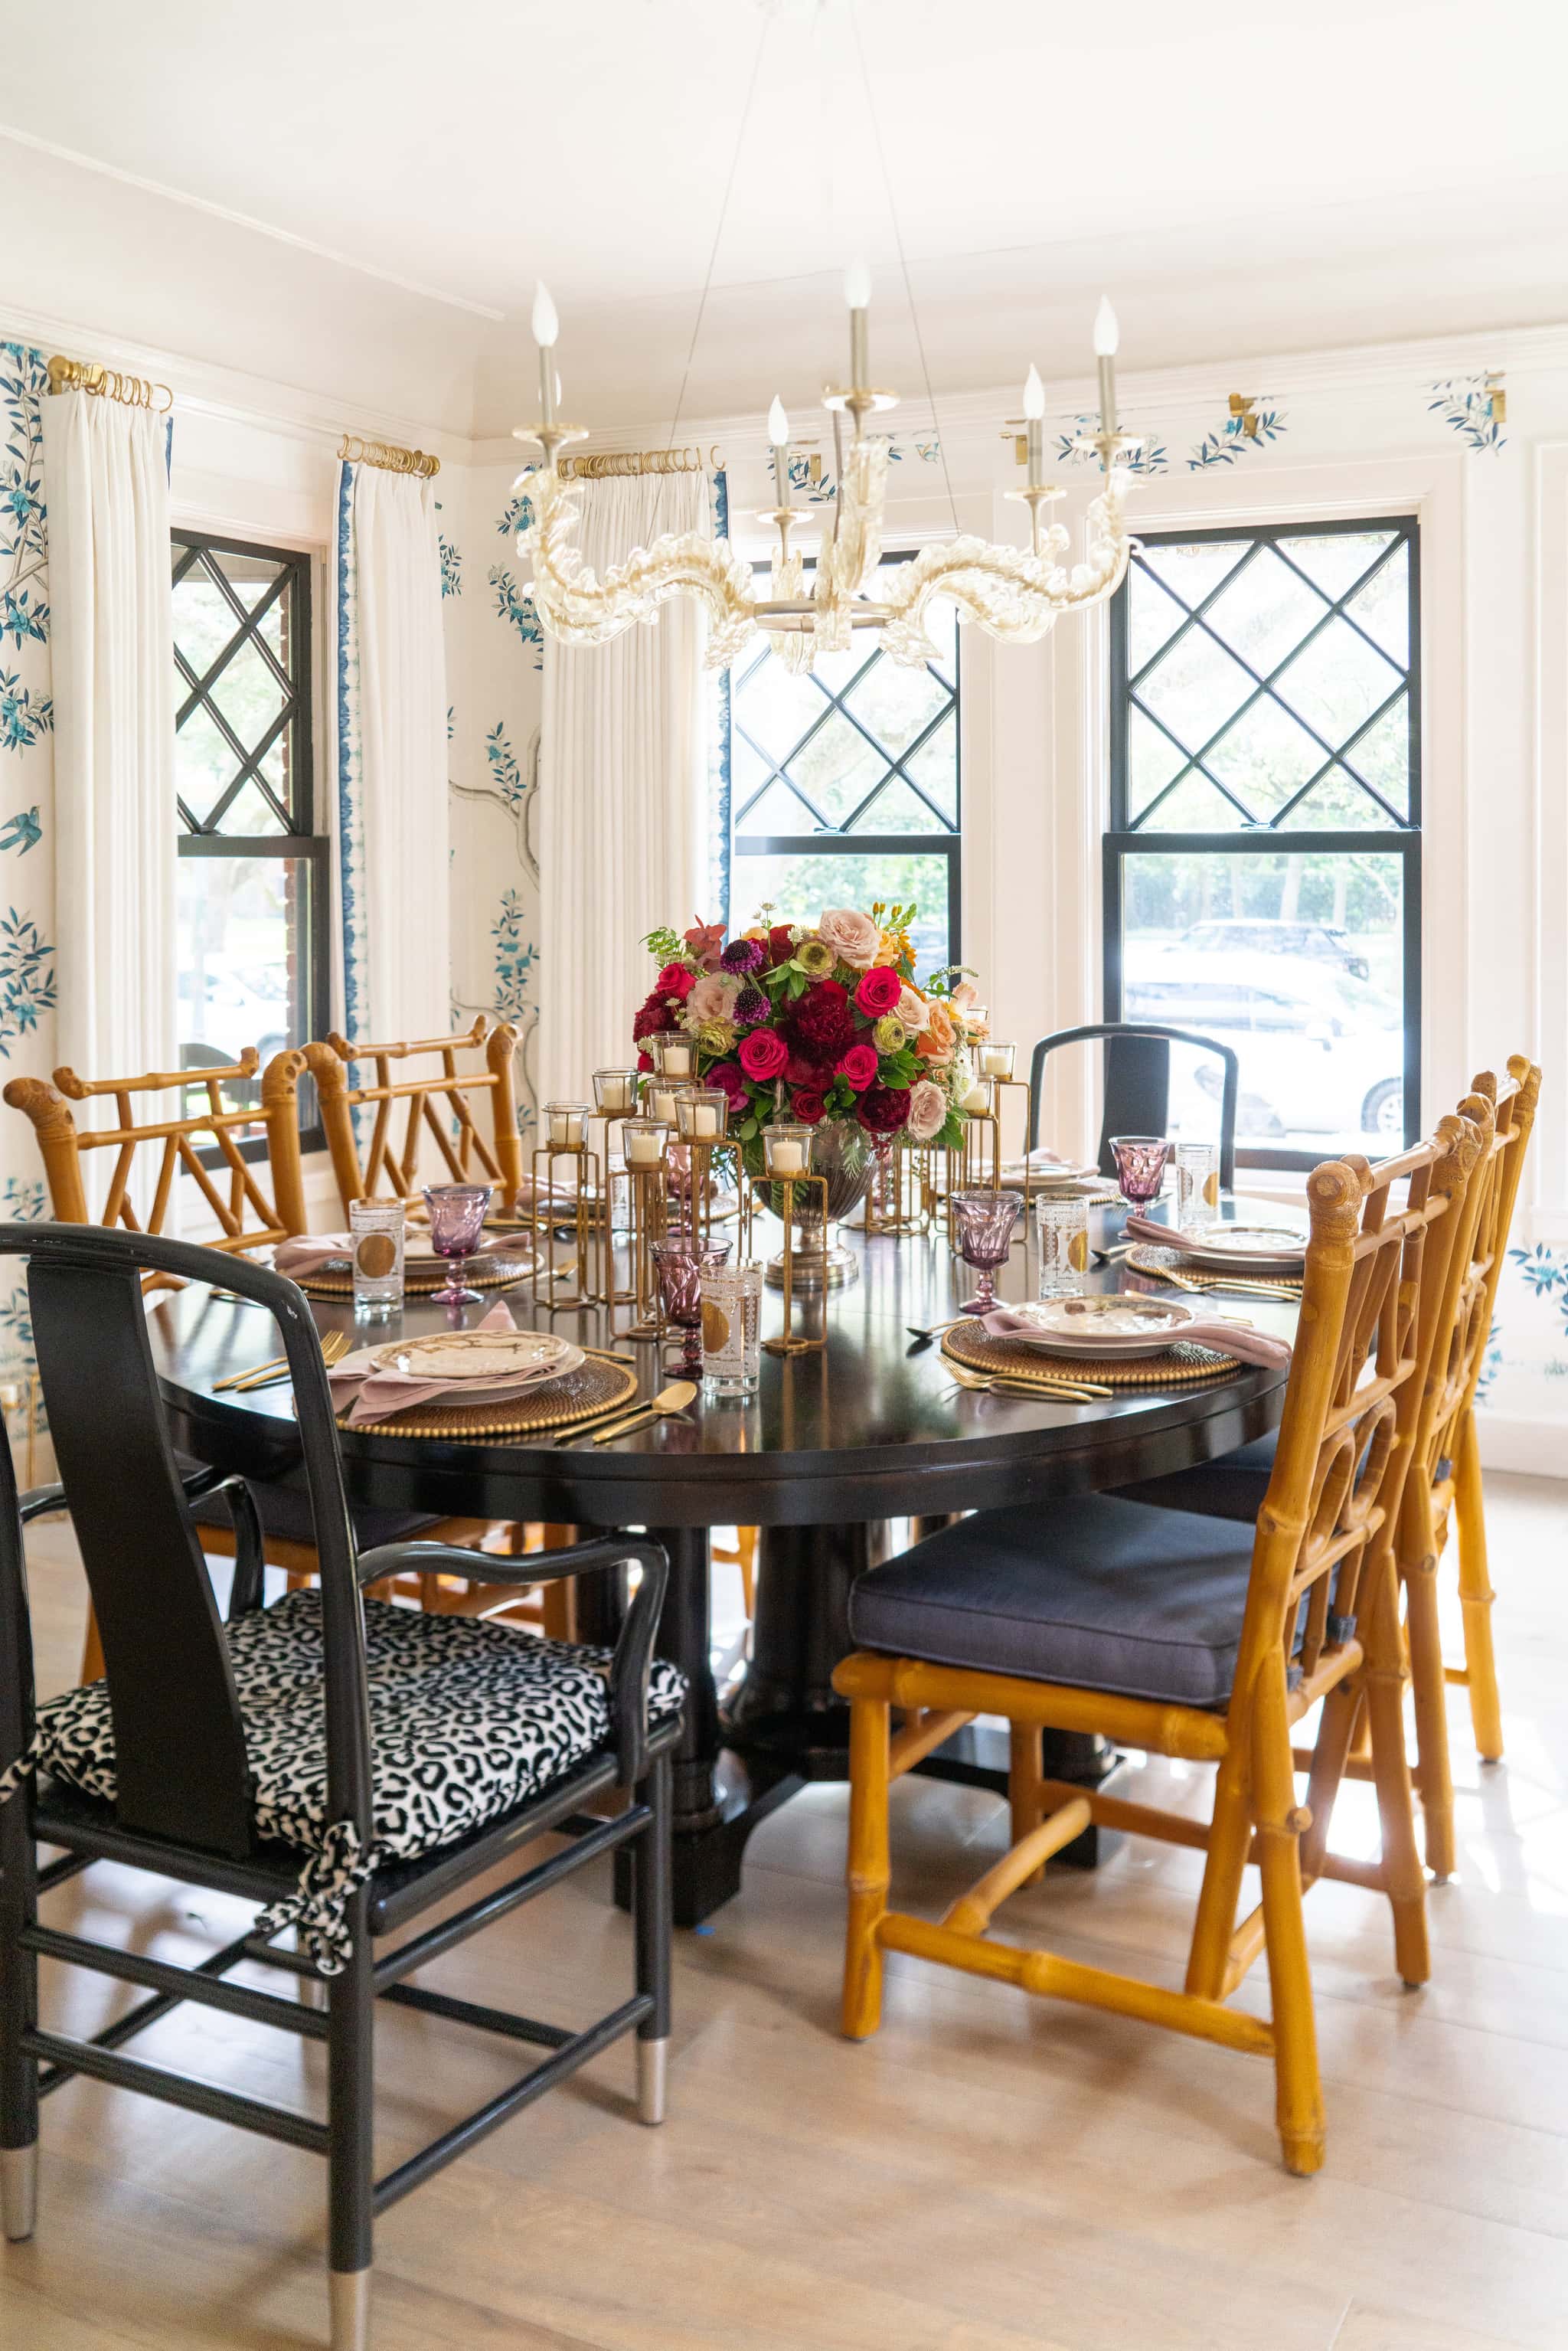 A view of a dining room with Gracie wallpaper and black table with bamboo dining chairs, in the home of Laura Umansky